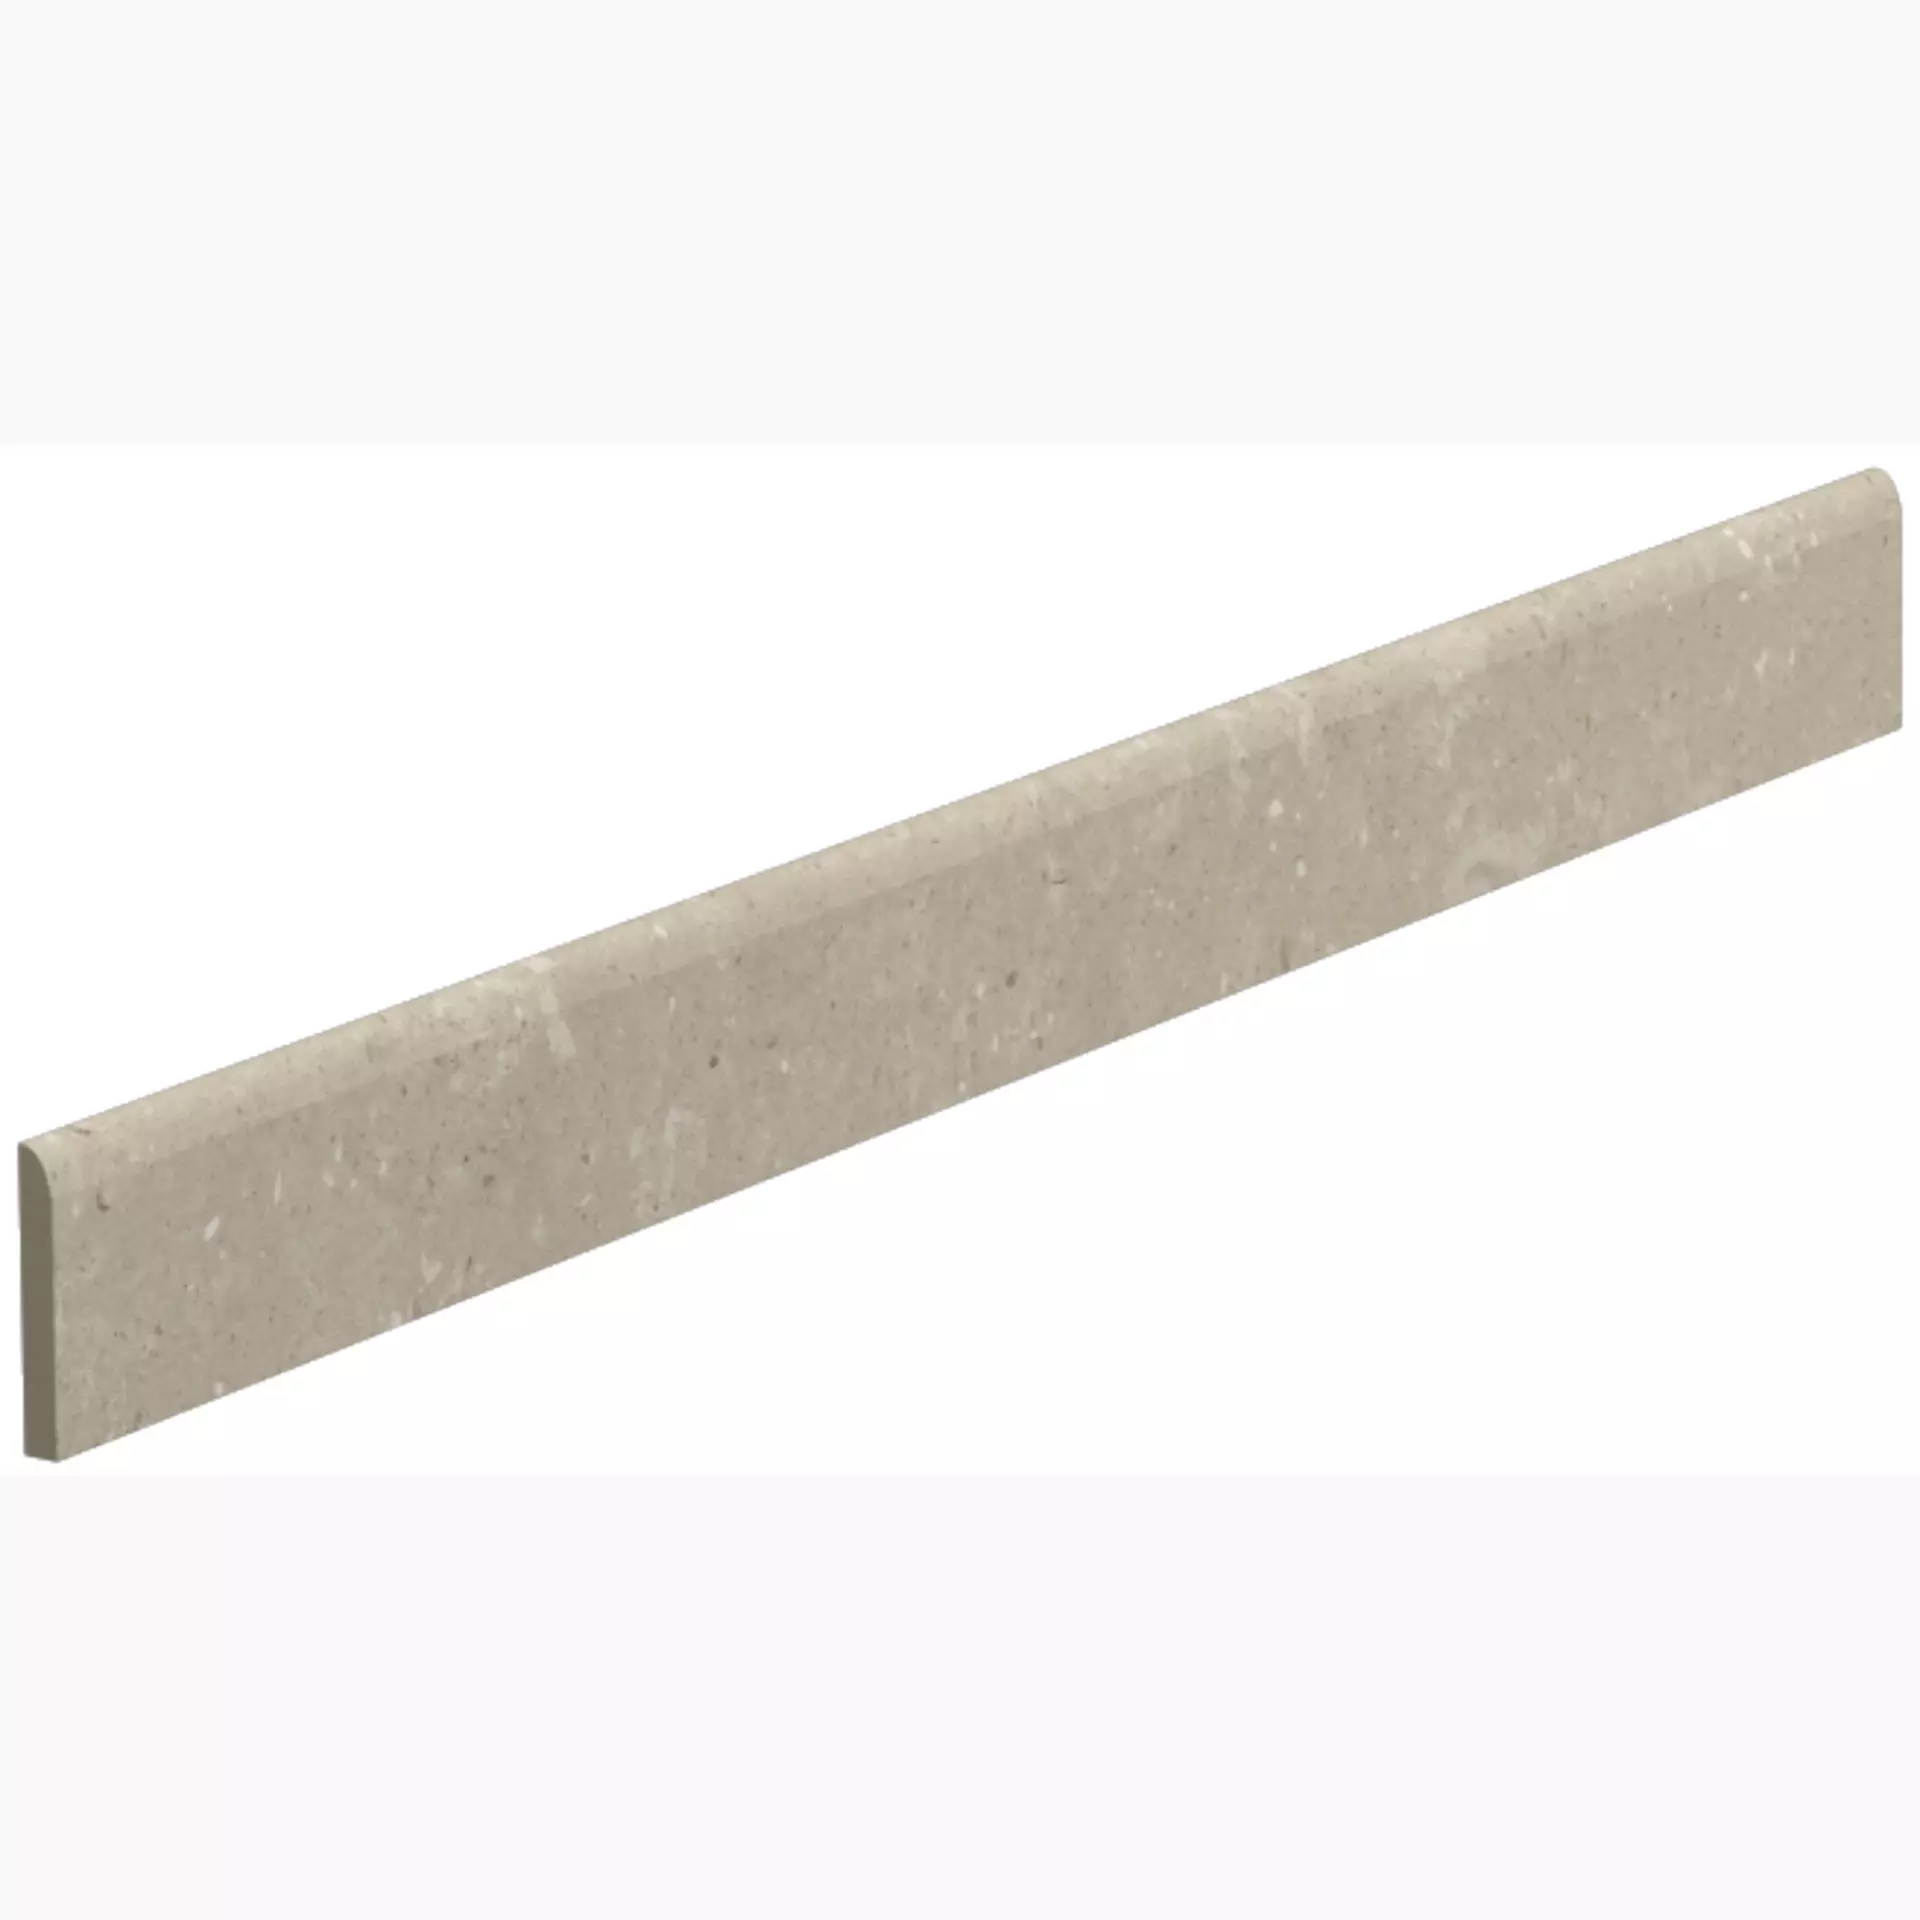 Del Conca Hwd Wild Greige Hwd11 Naturale Skirting board G0WD11R80 7x80cm rectified 8,5mm